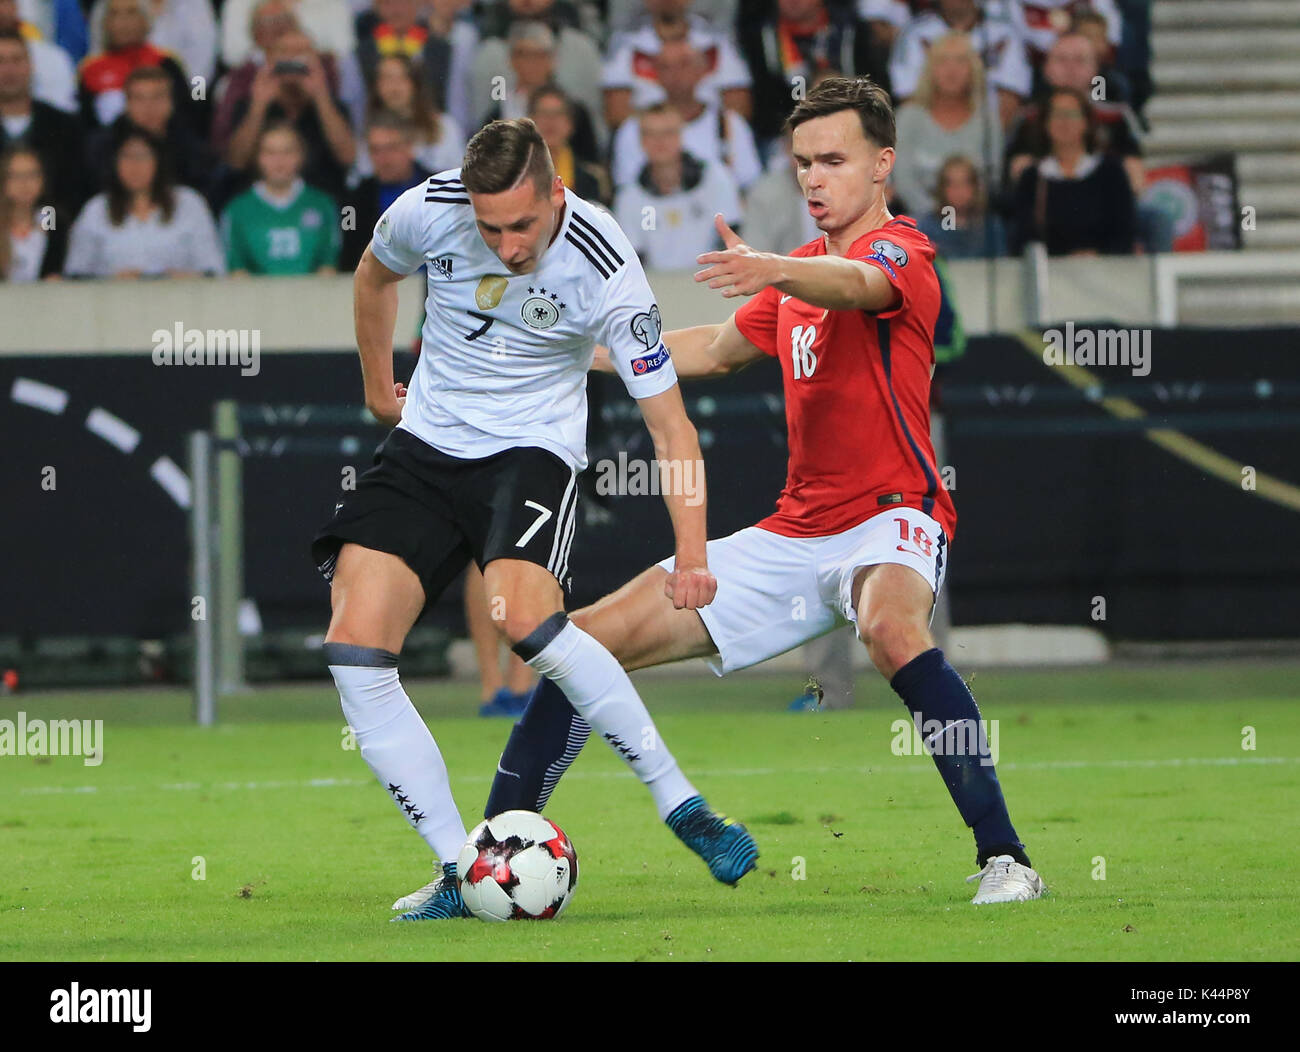 (170905) -- STUTTGART, Sept. 5, 2017 (Xinhua)  -- Germany's Julian Draxler (L) takes a shot and scores during a 2018 World Cup qualification match between Germany and Norway in Stuttgart, Germany, on Sept. 4, 2017. Germany won 6-0. (Xinhua/Philippe Ruiz) Stock Photo